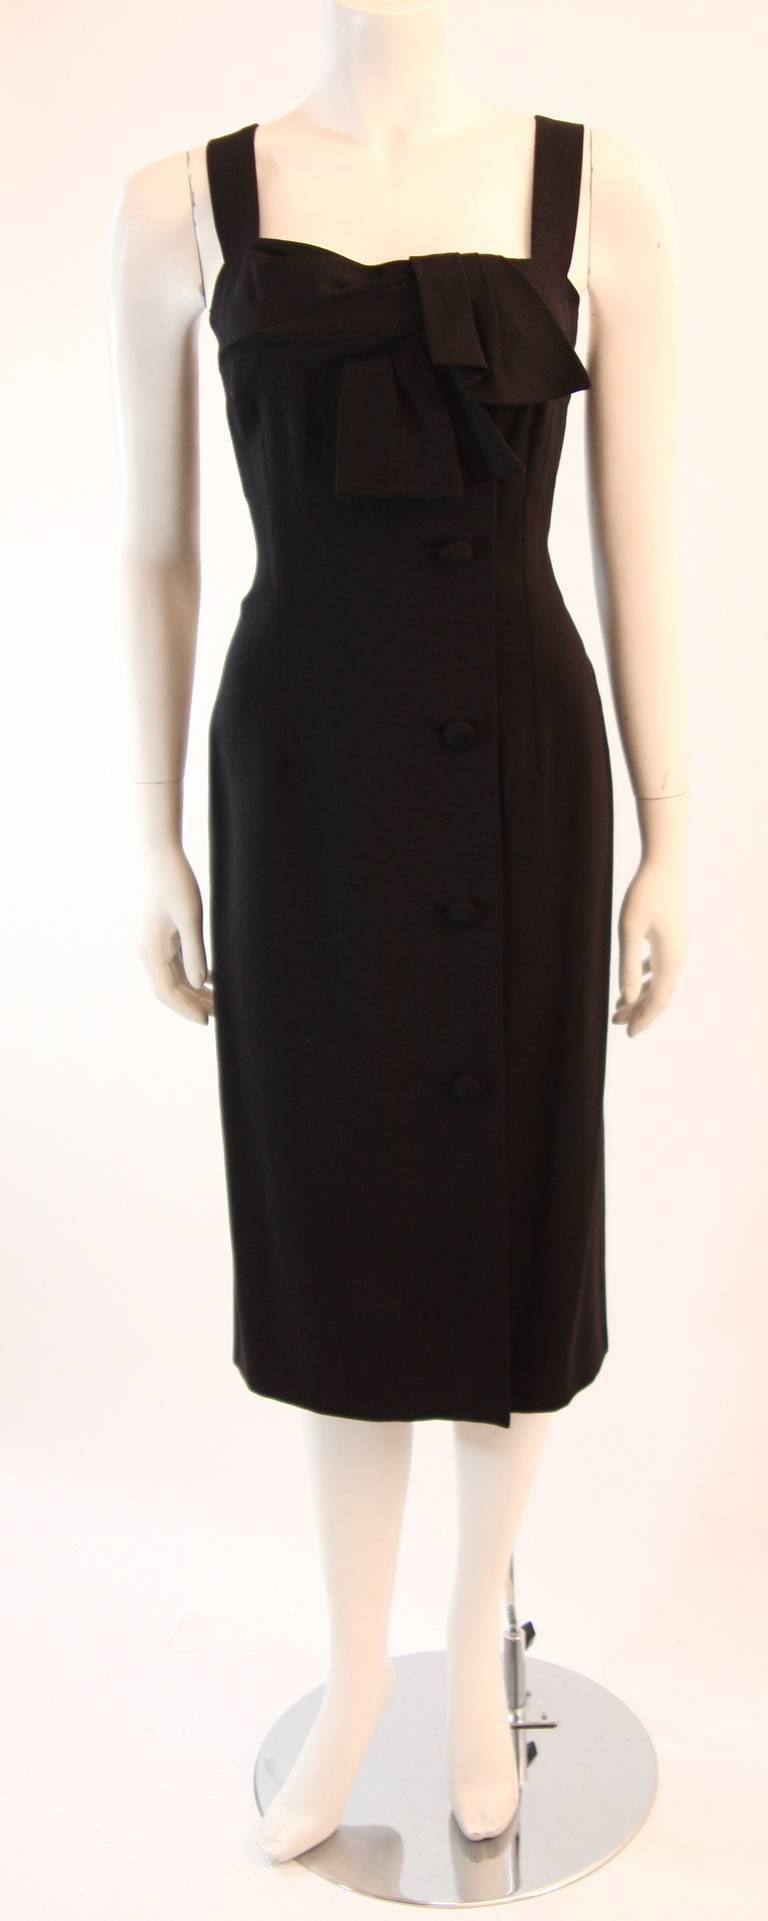 This is a gorgeous COUTURE Pierre Balmain dress. The dress is composed of a wonderful black heavy weight linen. This three quarter dress features a front draped bow design and side button details. Side zipper closure for ease of access and bra